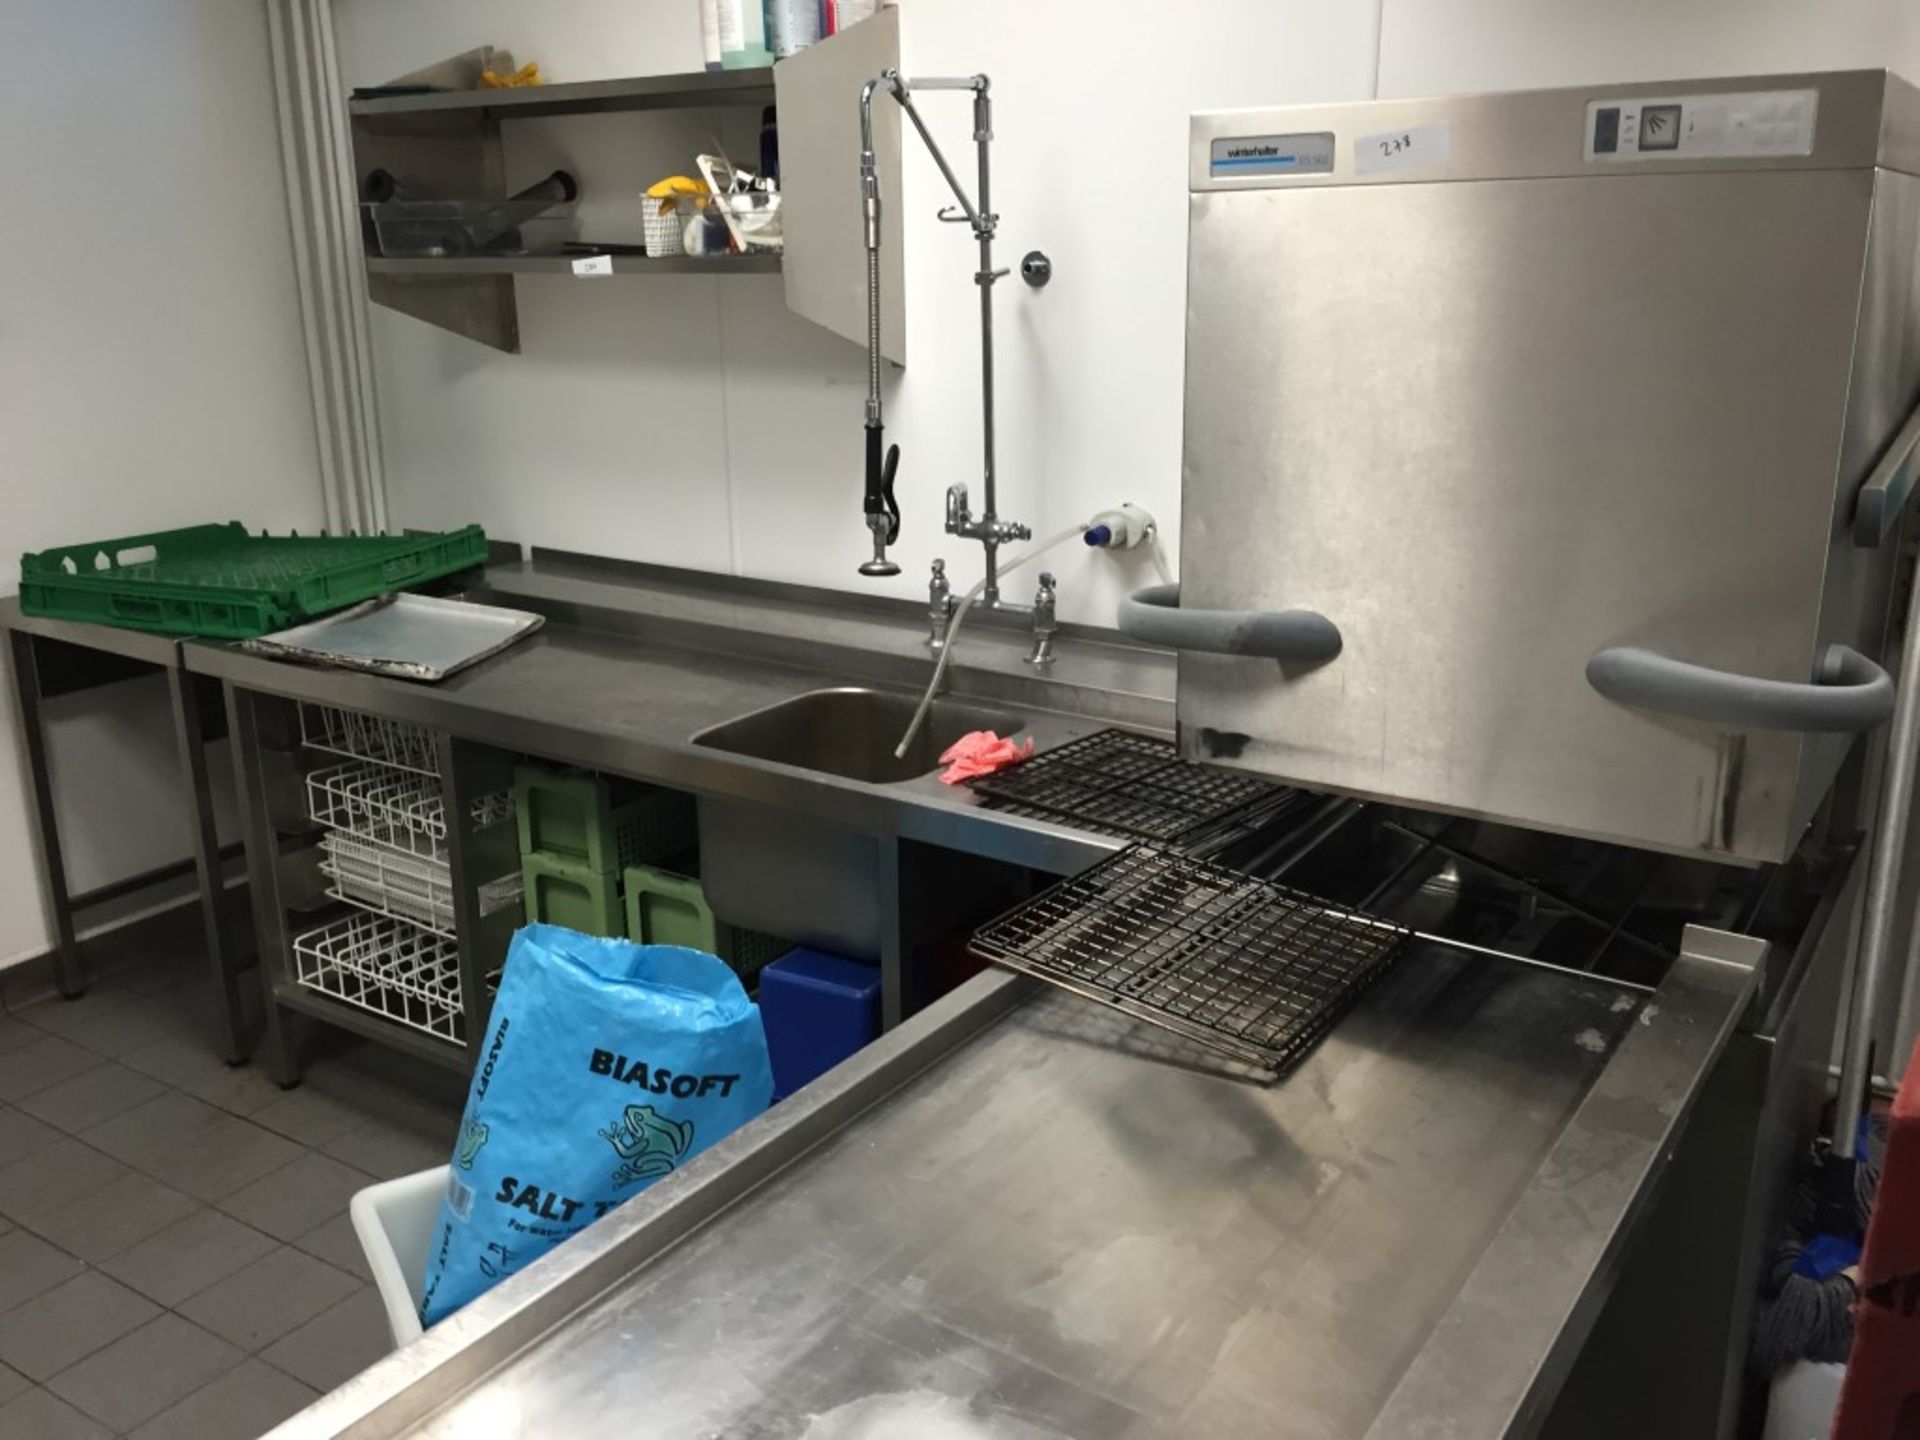 1 x Winterhalter GS502 Commercial Pass Through Dishwasher Station - Includes Stainless Steel Sink - Image 4 of 10